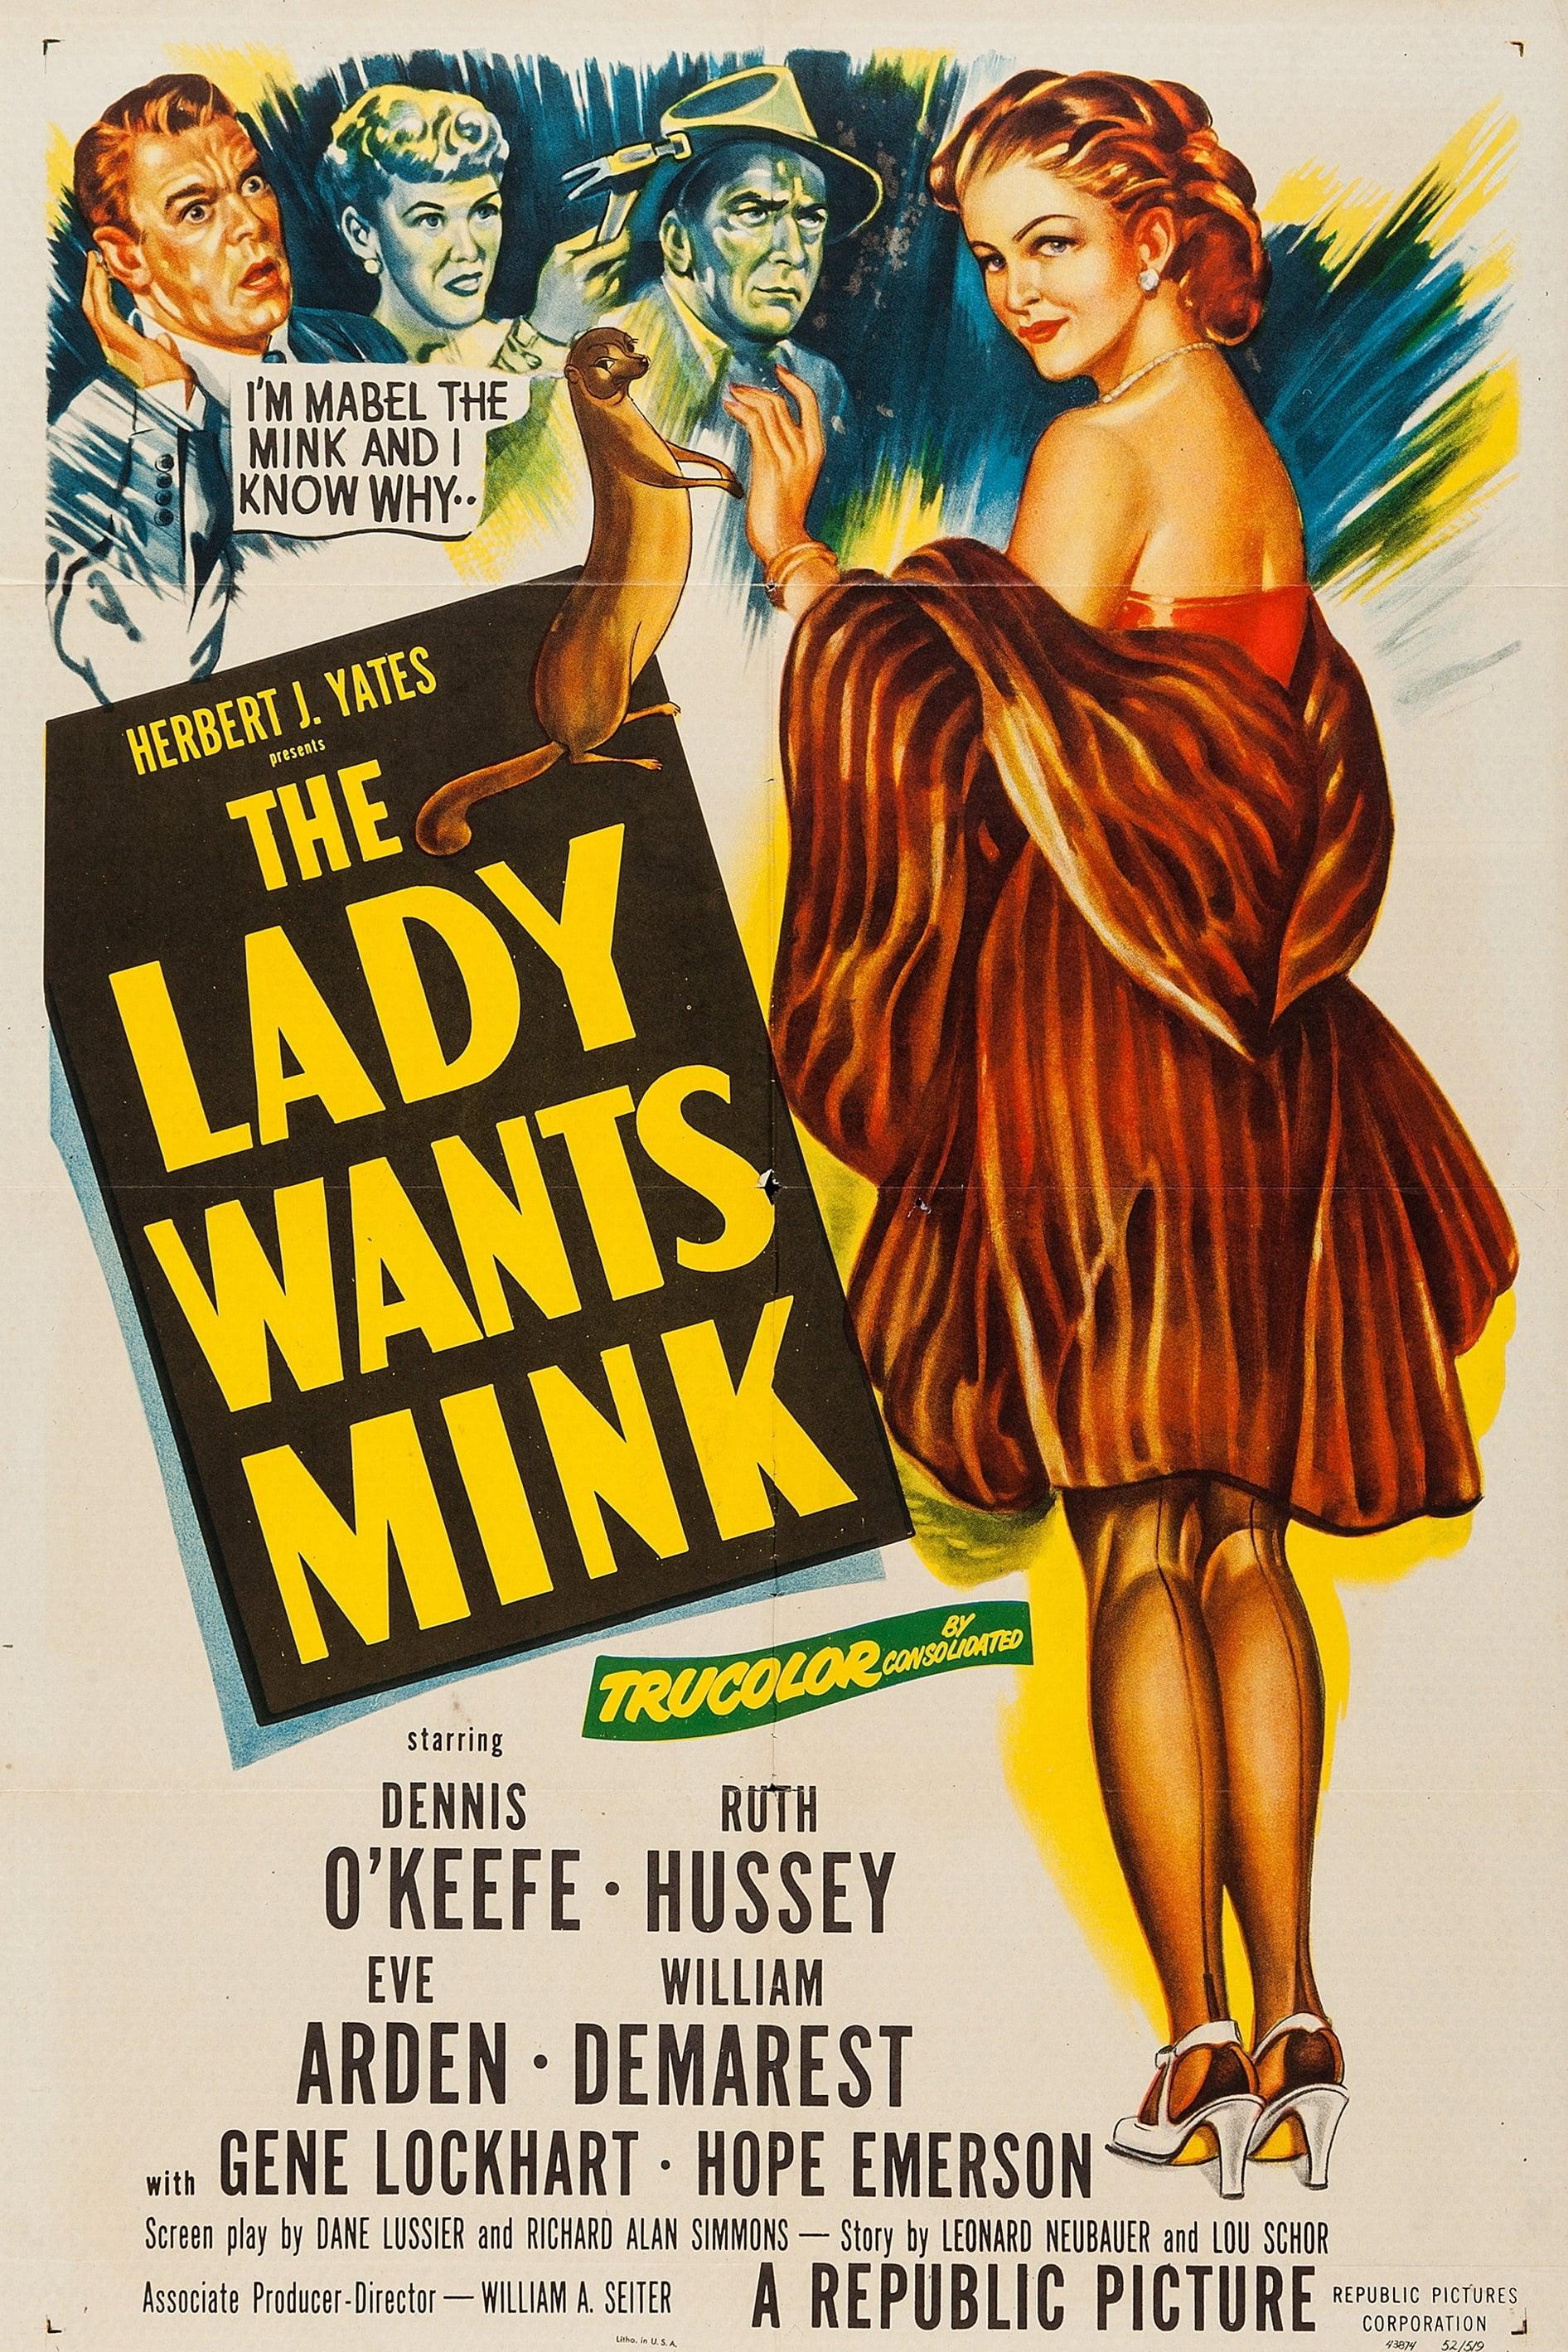 The Lady Wants Mink poster